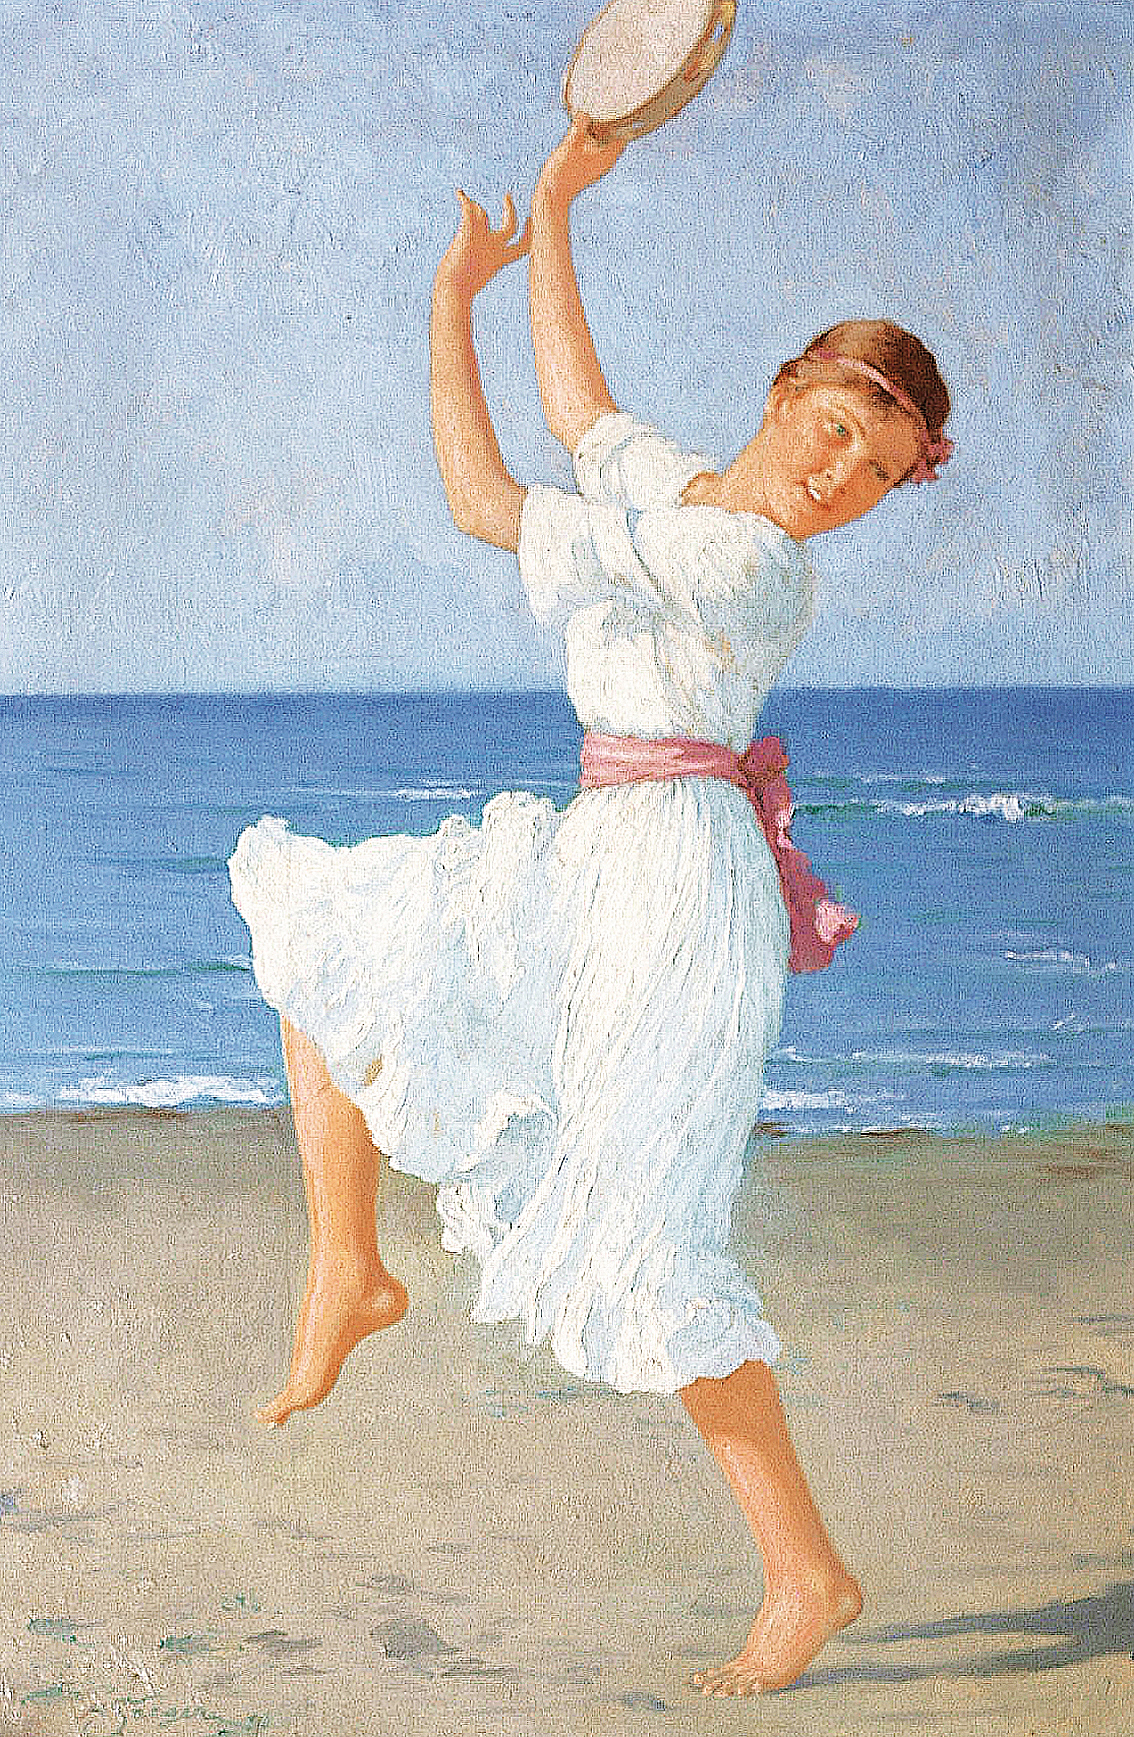 A tambourine dancer at the shore